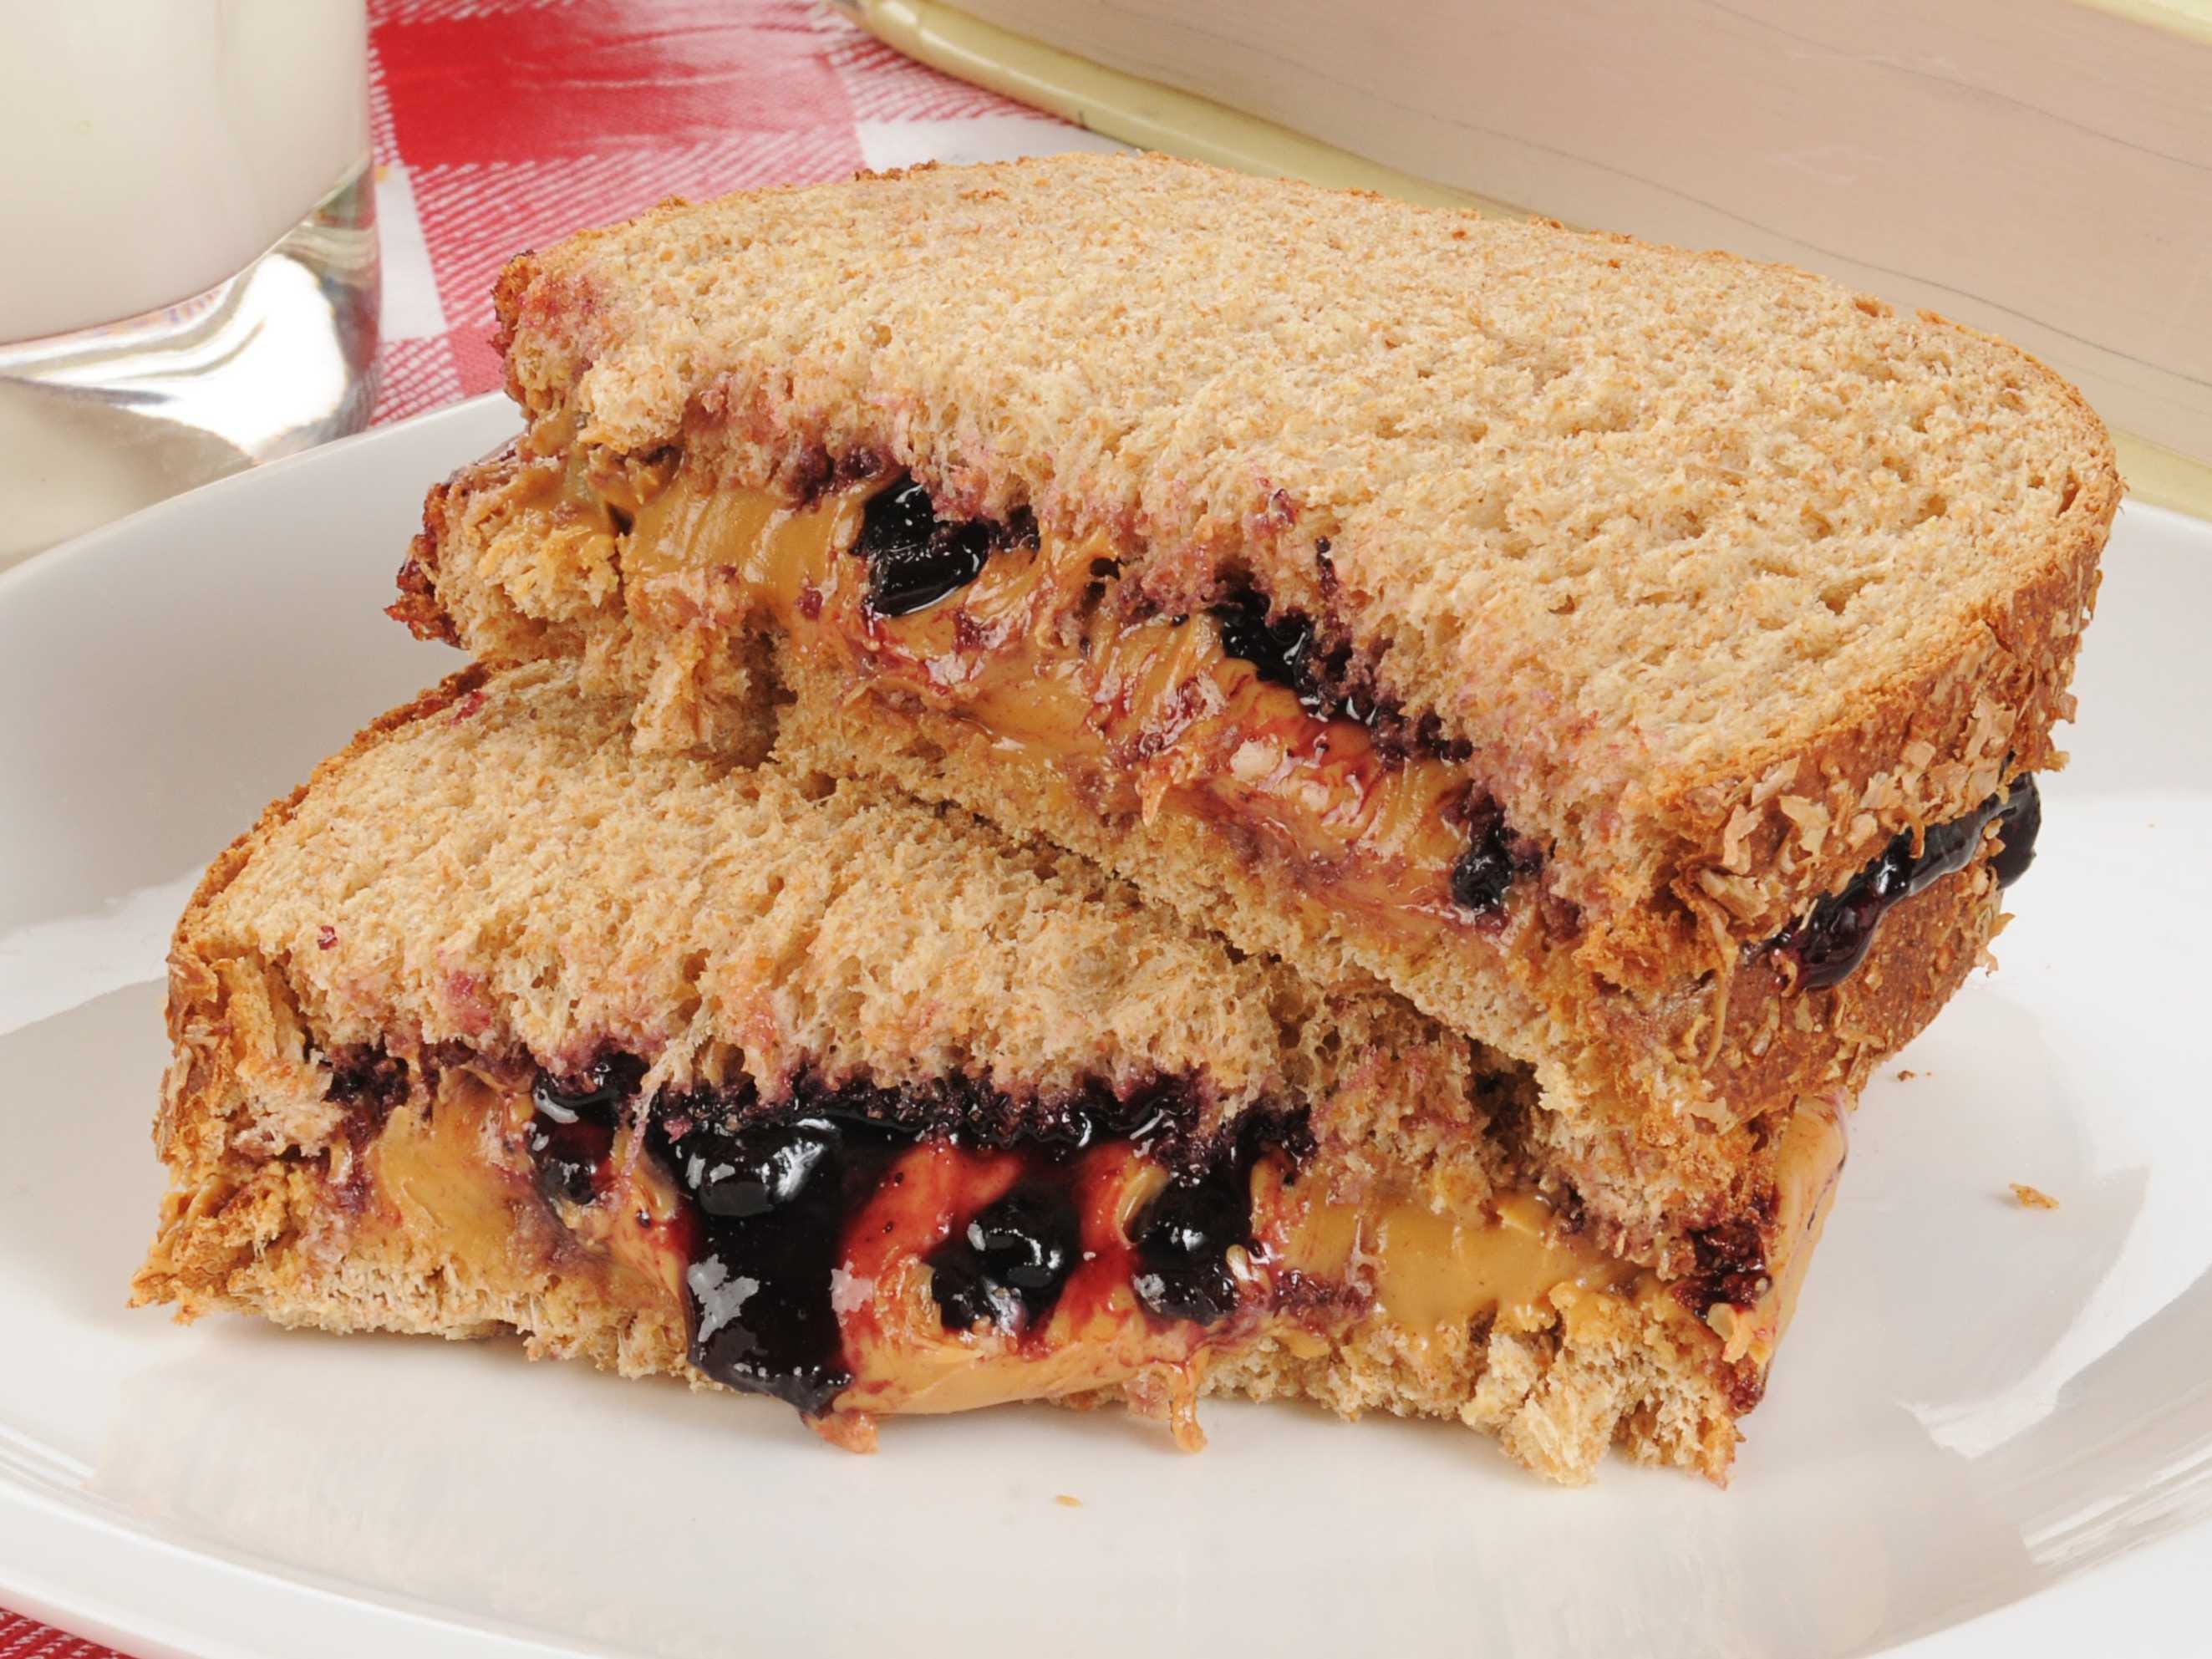 <p>Montana is known for its huckleberries, which grow in the wild during the summer and fall seasons. Try its famous huckleberry jam for a delicious PB&J.</p>